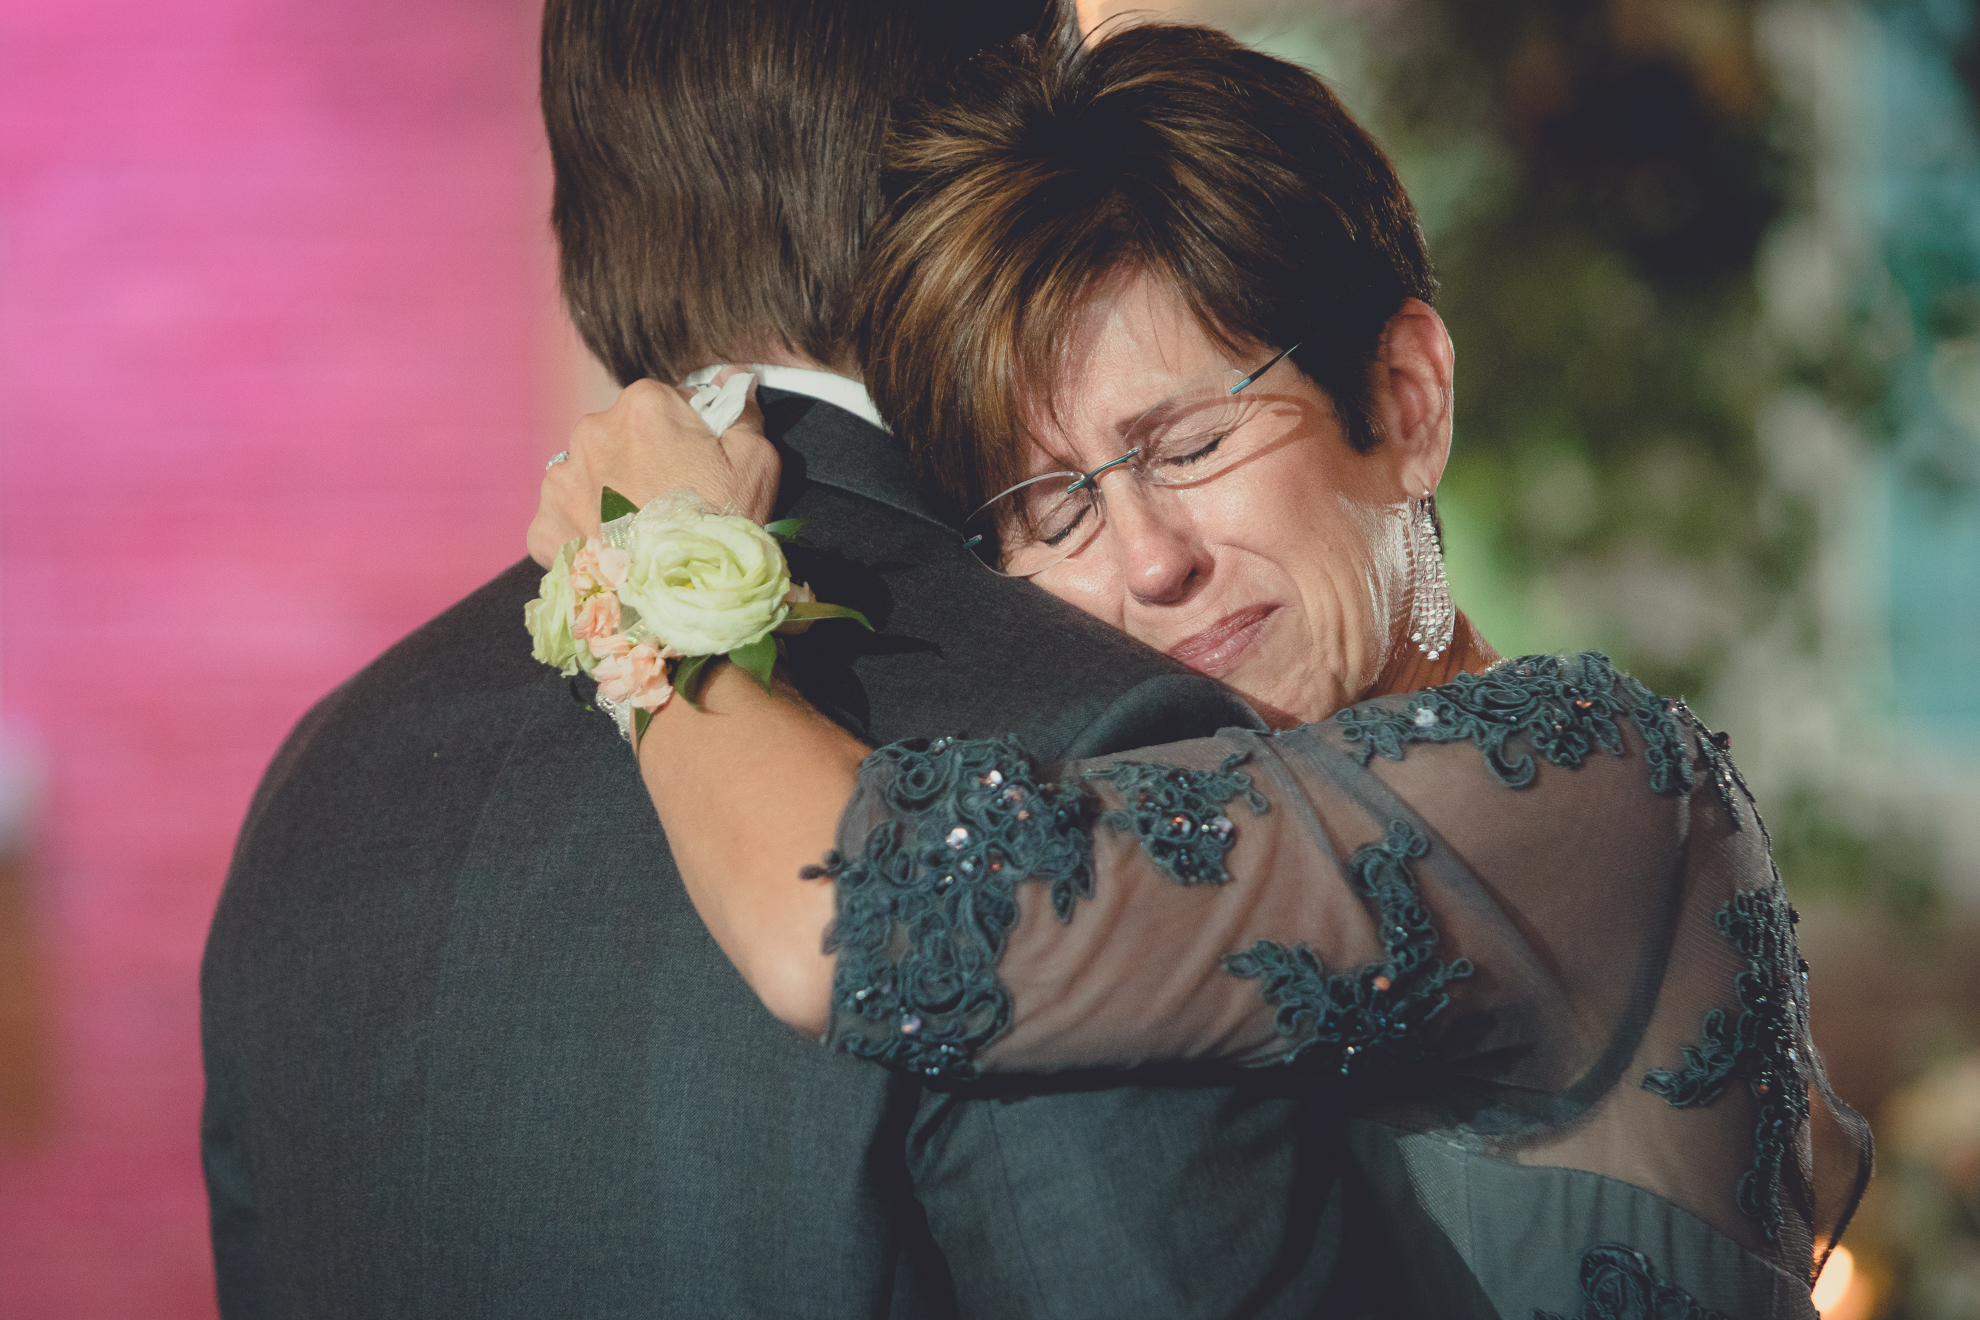 Mom cries while hugging groom during first dance at wedding reception at the Foundry Suites in Buffalo, NY